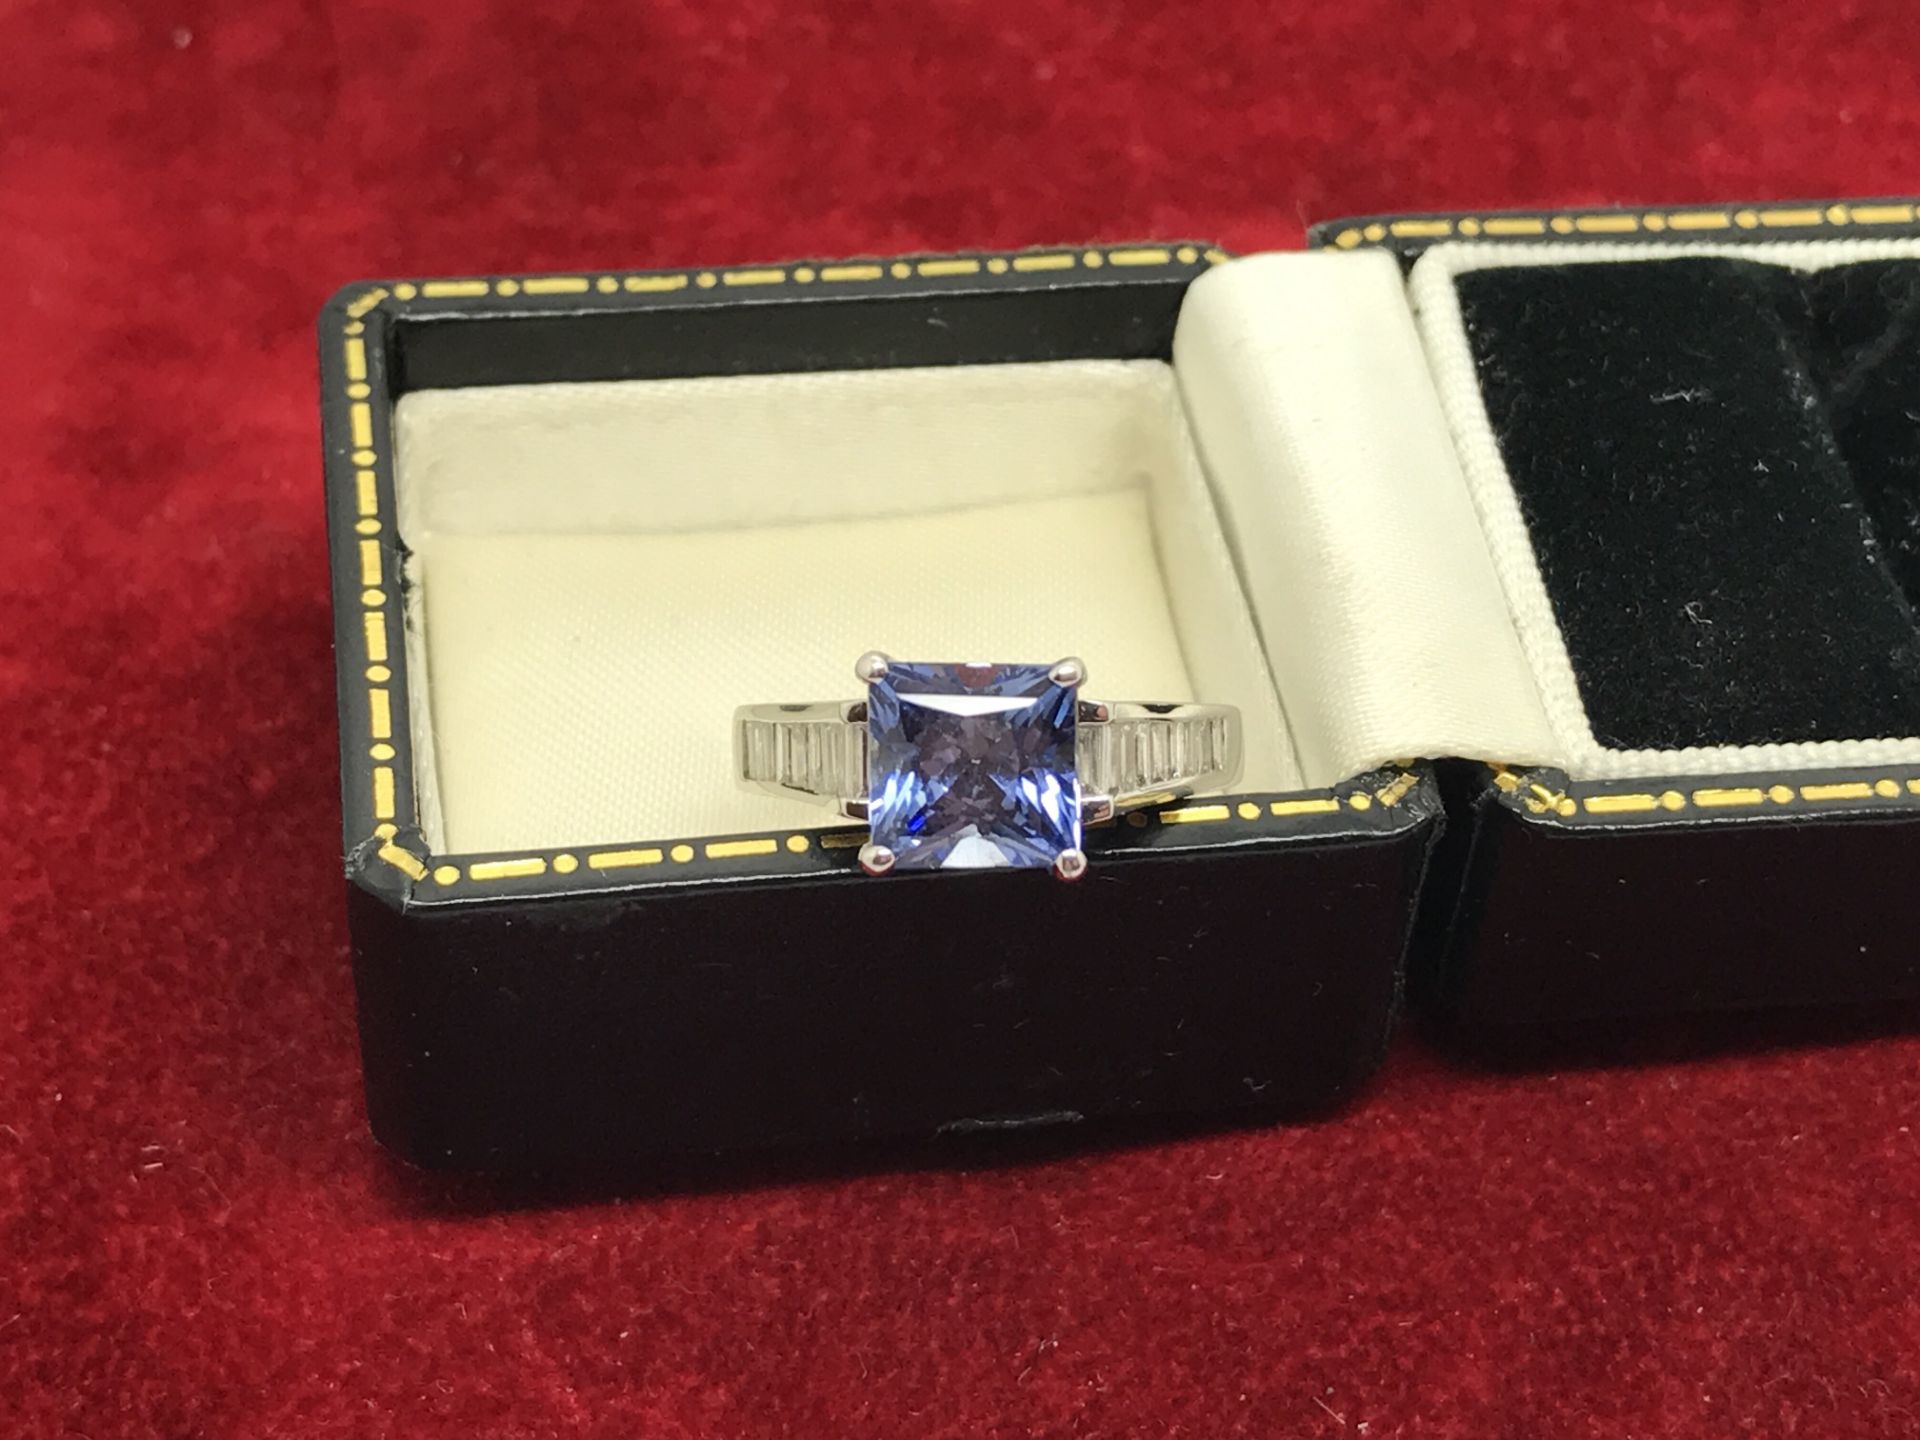 AMAZING 2.55ct CORNFLOWER BLUE SAPPHIRE & 0.54ct BAGUETTE DIAMOND RING SET IN 14ct WHITE GOLD - Image 2 of 2